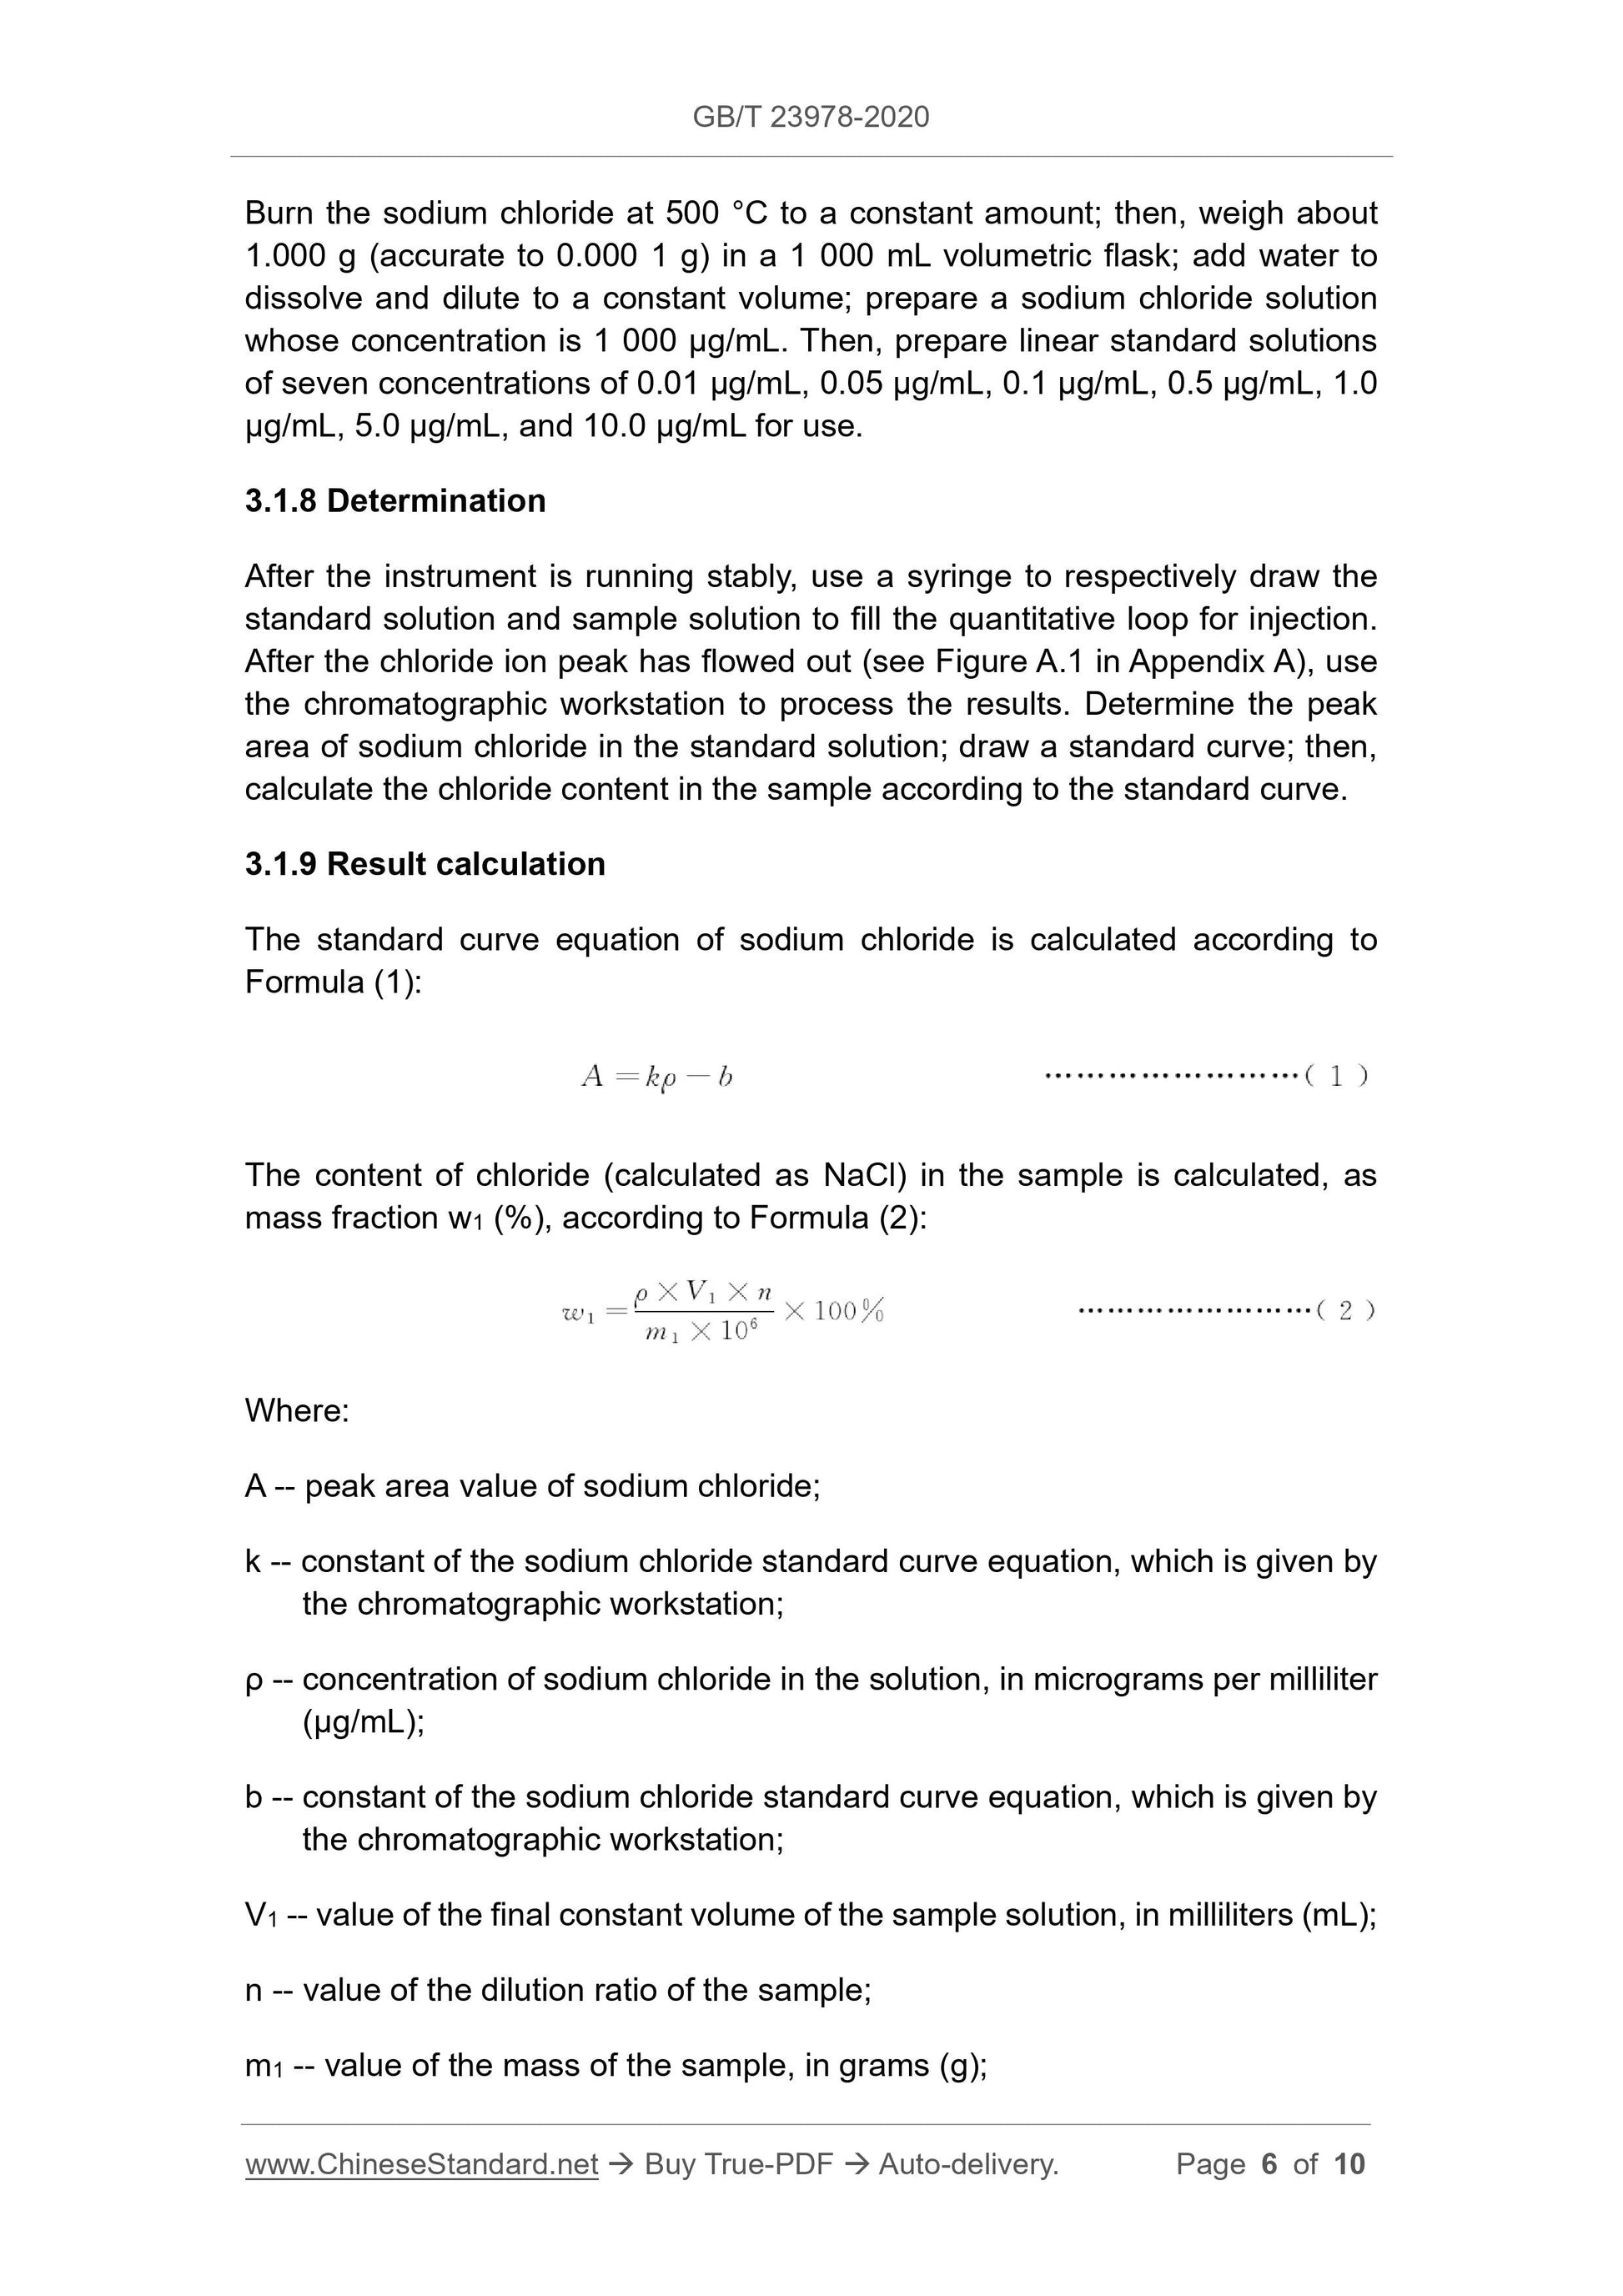 GB/T 23978-2020 Page 4